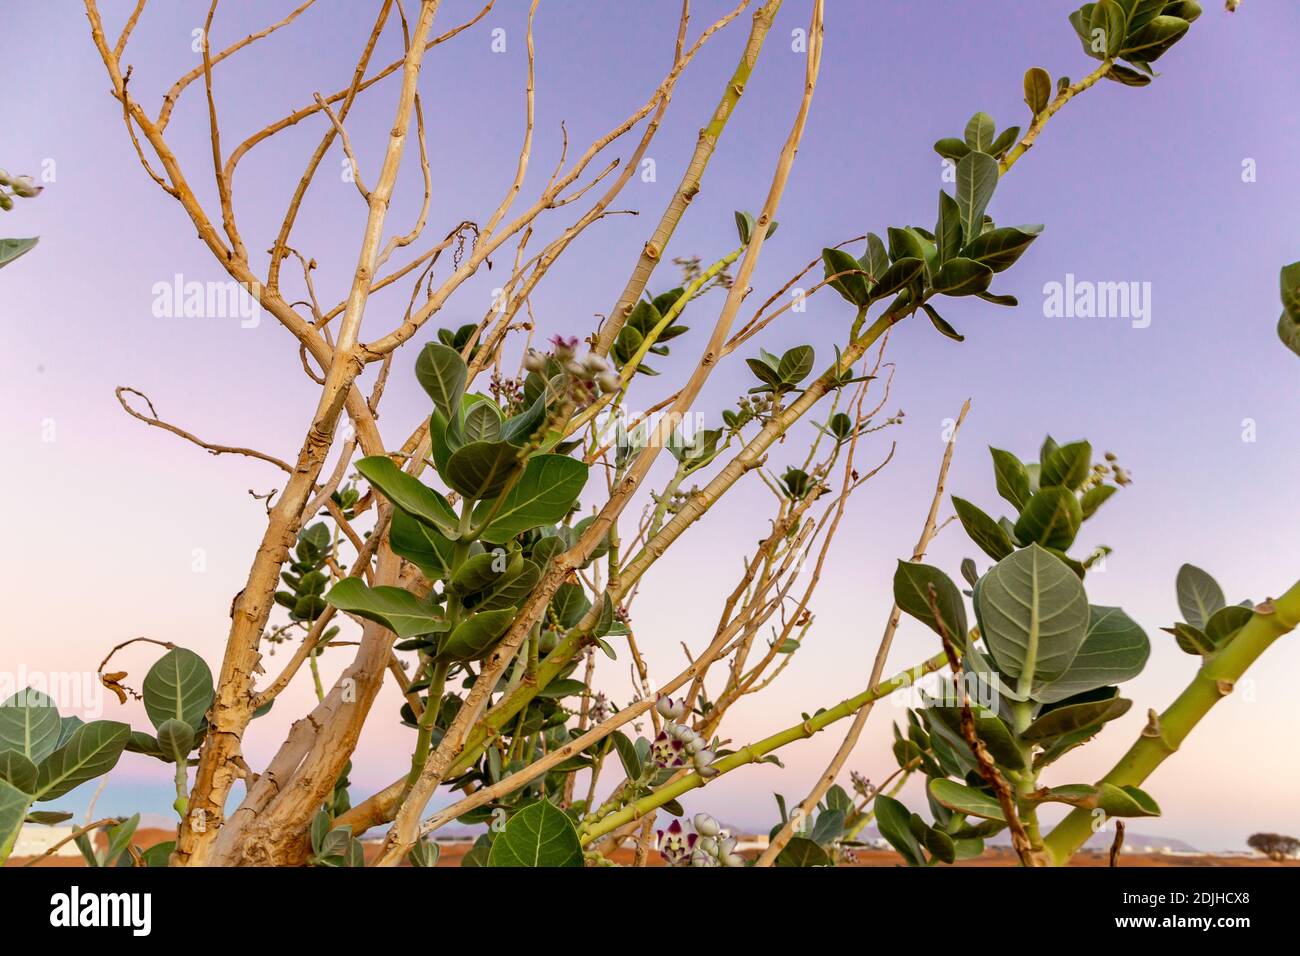 Purple Crown Flower plant (Calotropis procera), dry branches and leaves with purple sky in the background, close-up view. Stock Photo